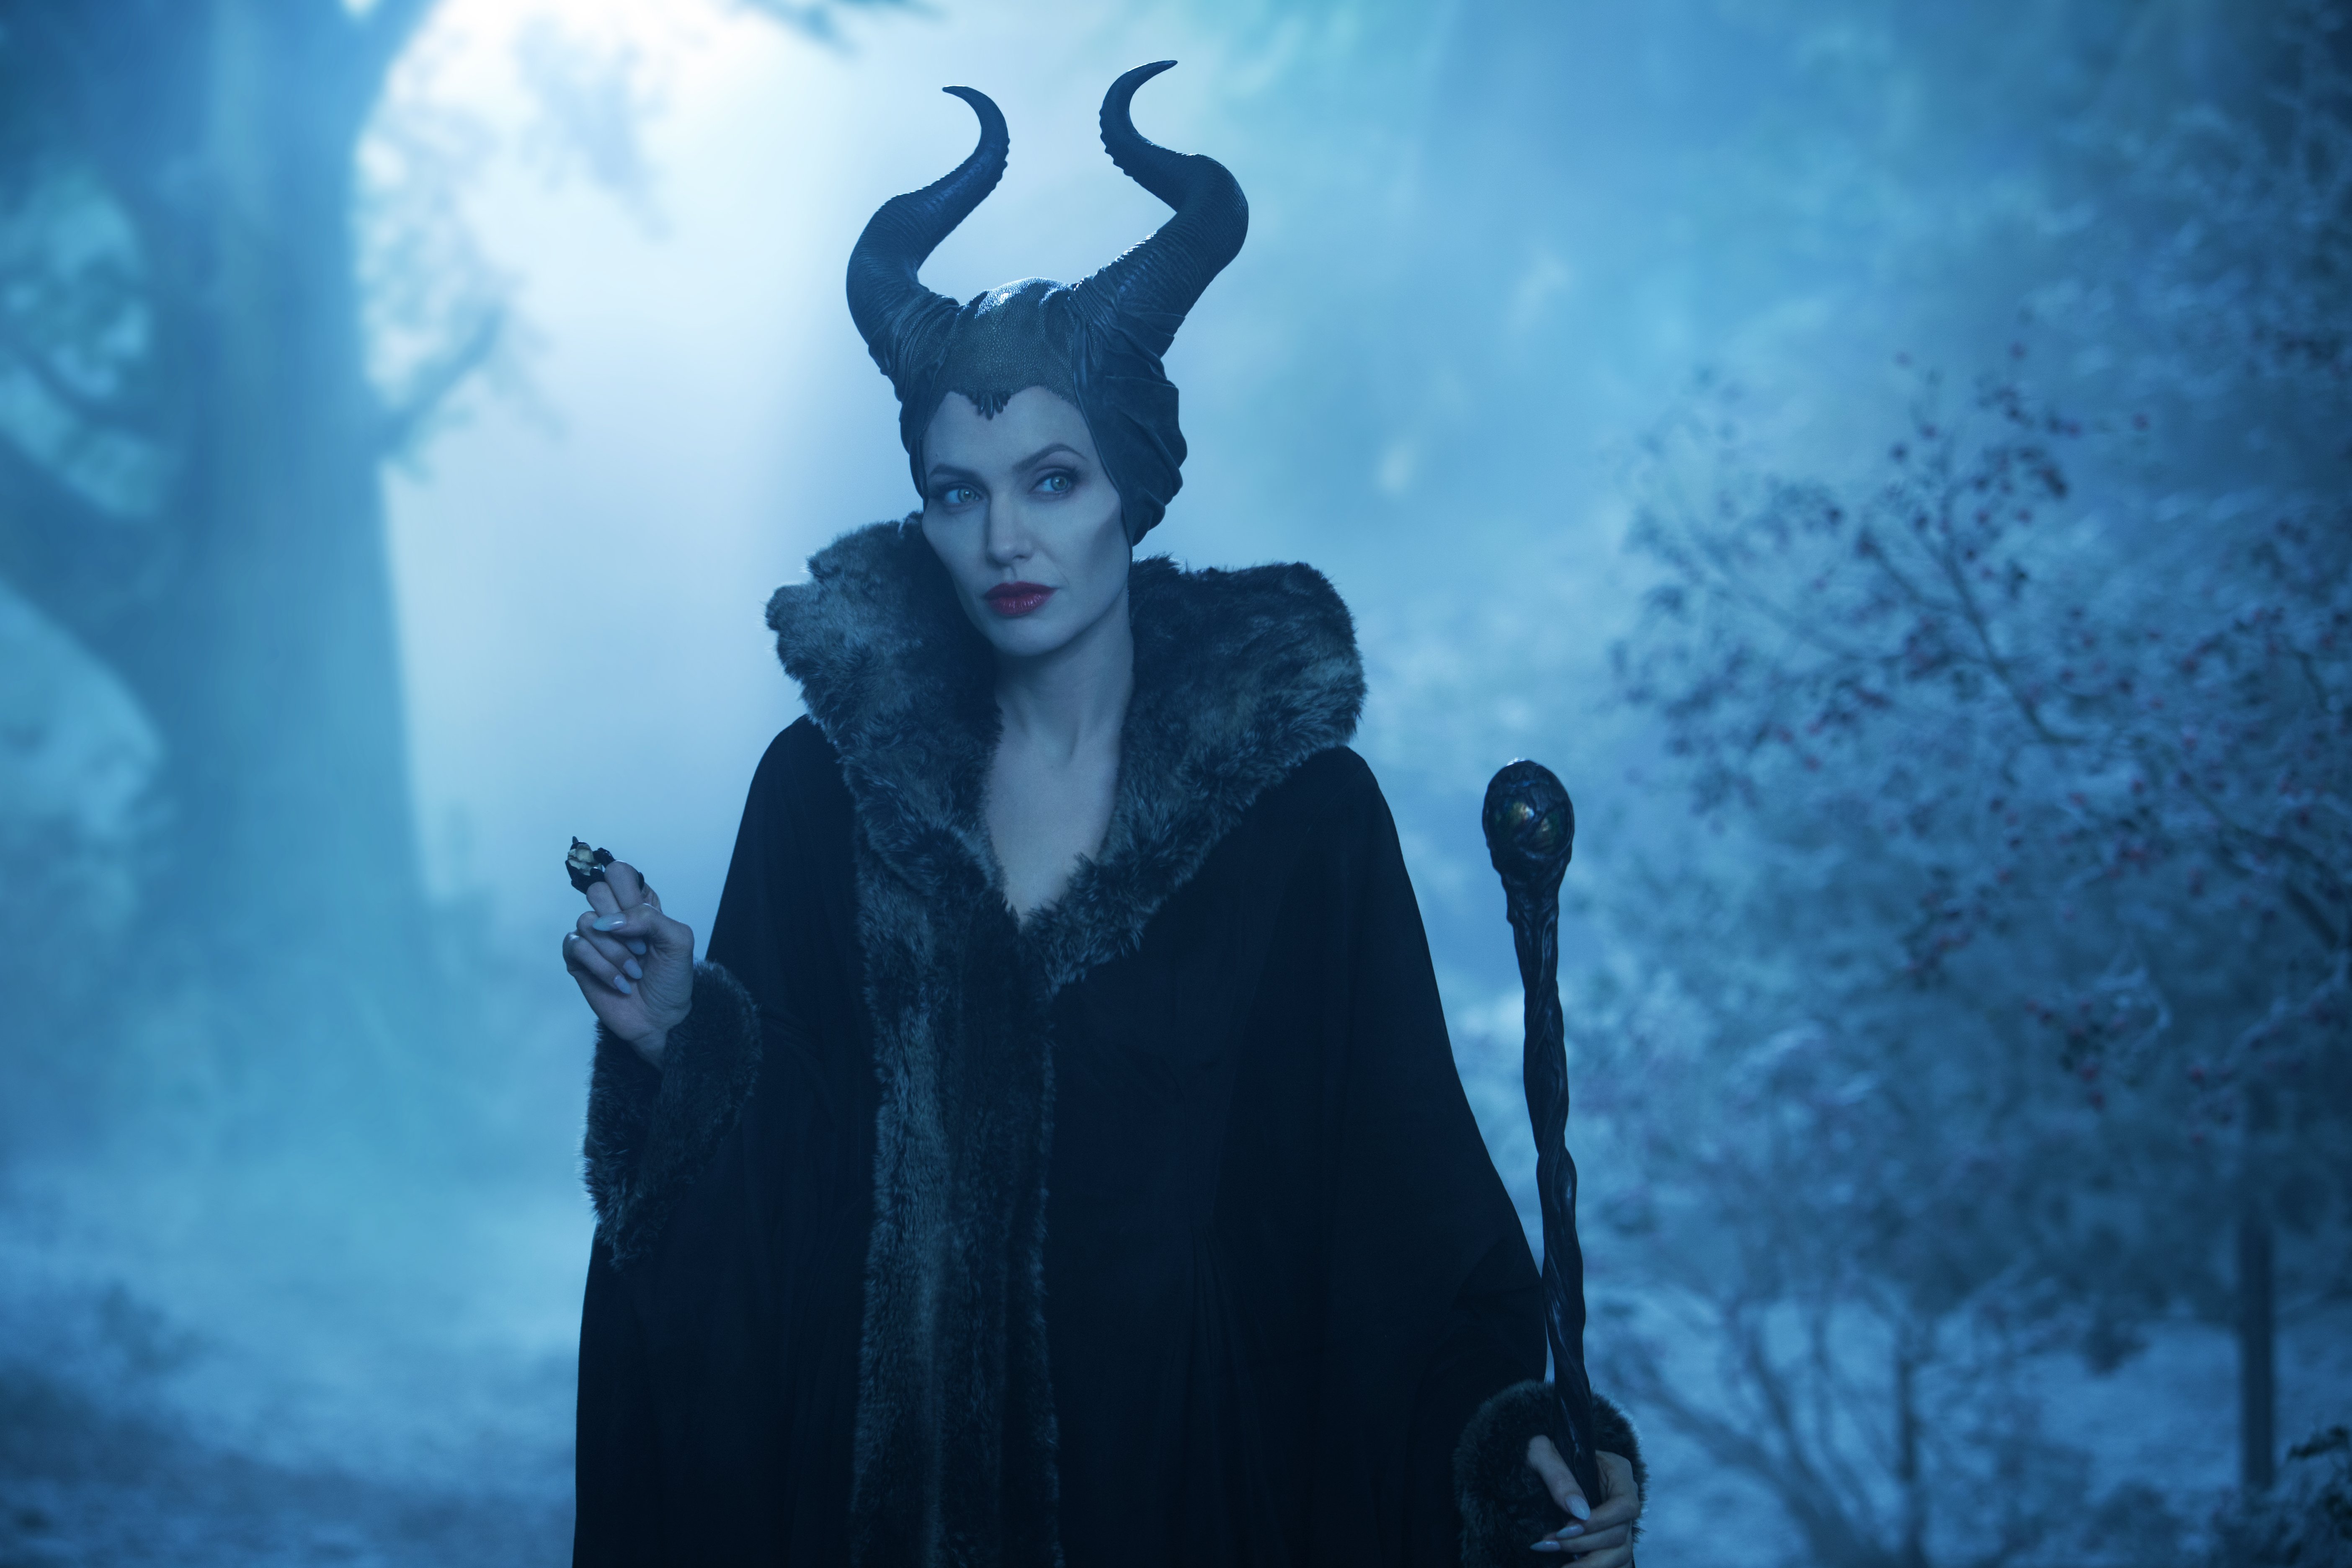 Disney's Maleficent unfolds the innocent past of the Sleeping